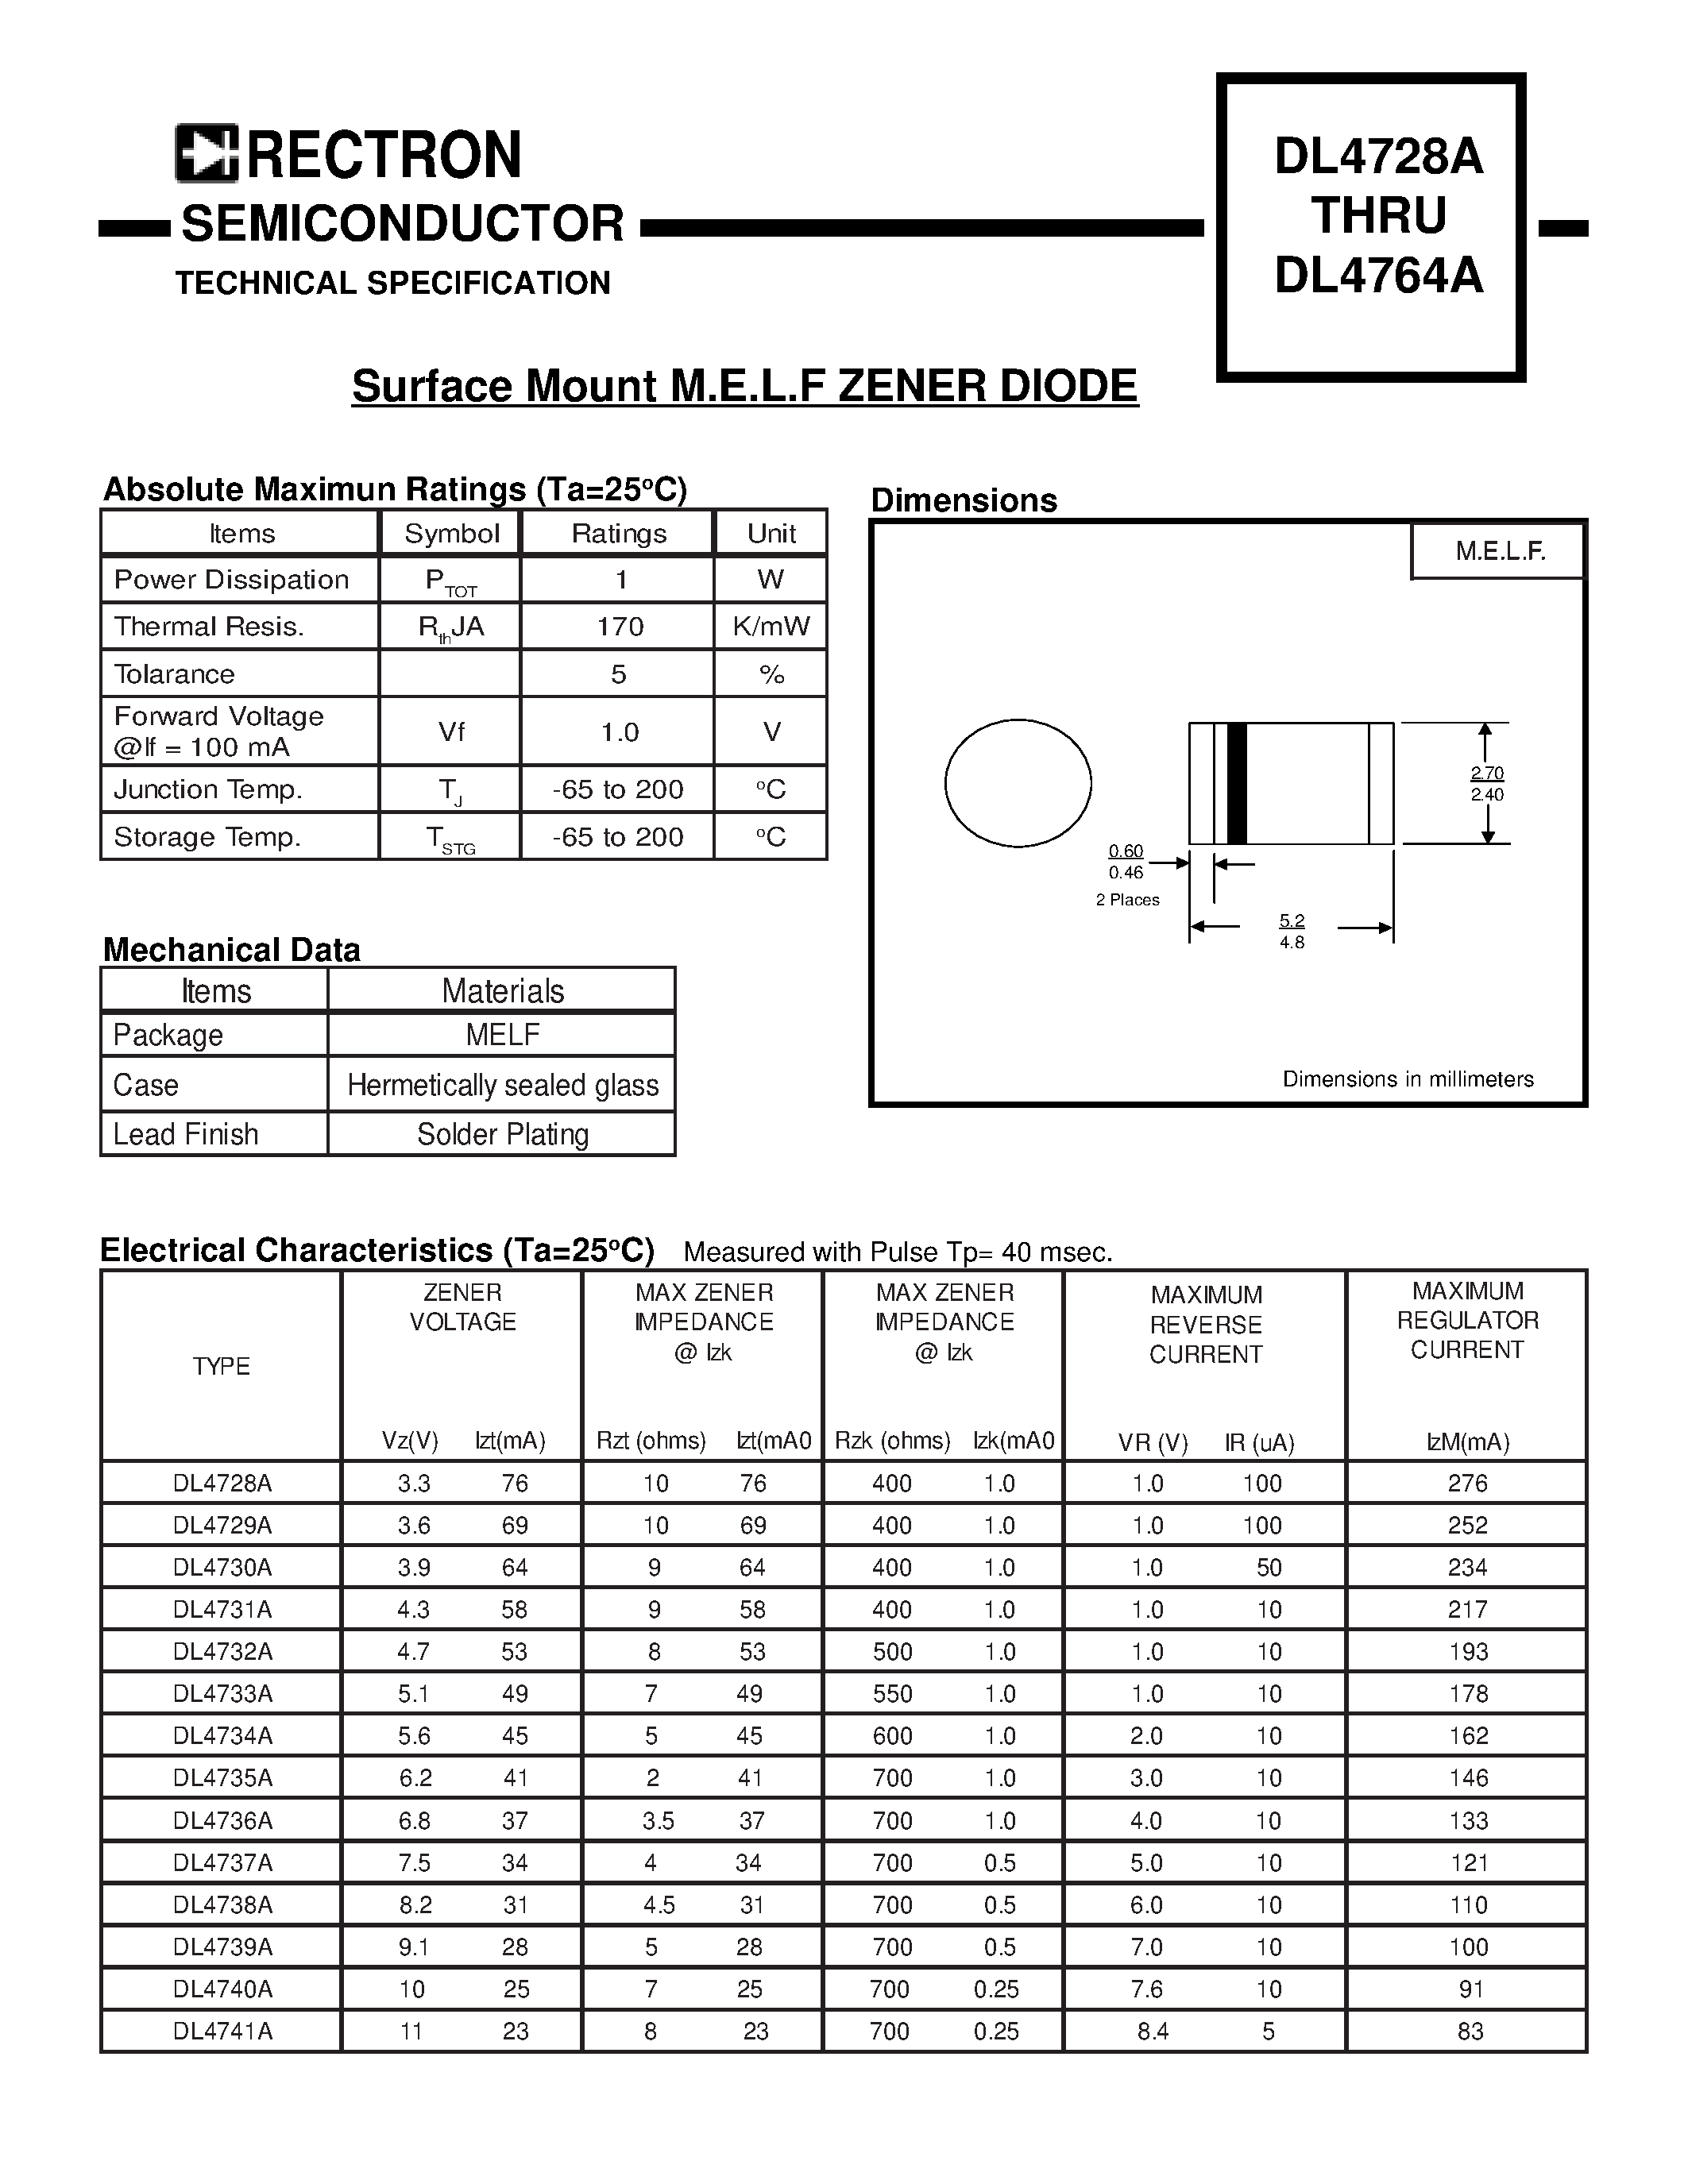 Datasheet DL4754A - Surface Mount M.E.L.F ZENER DIODE page 1